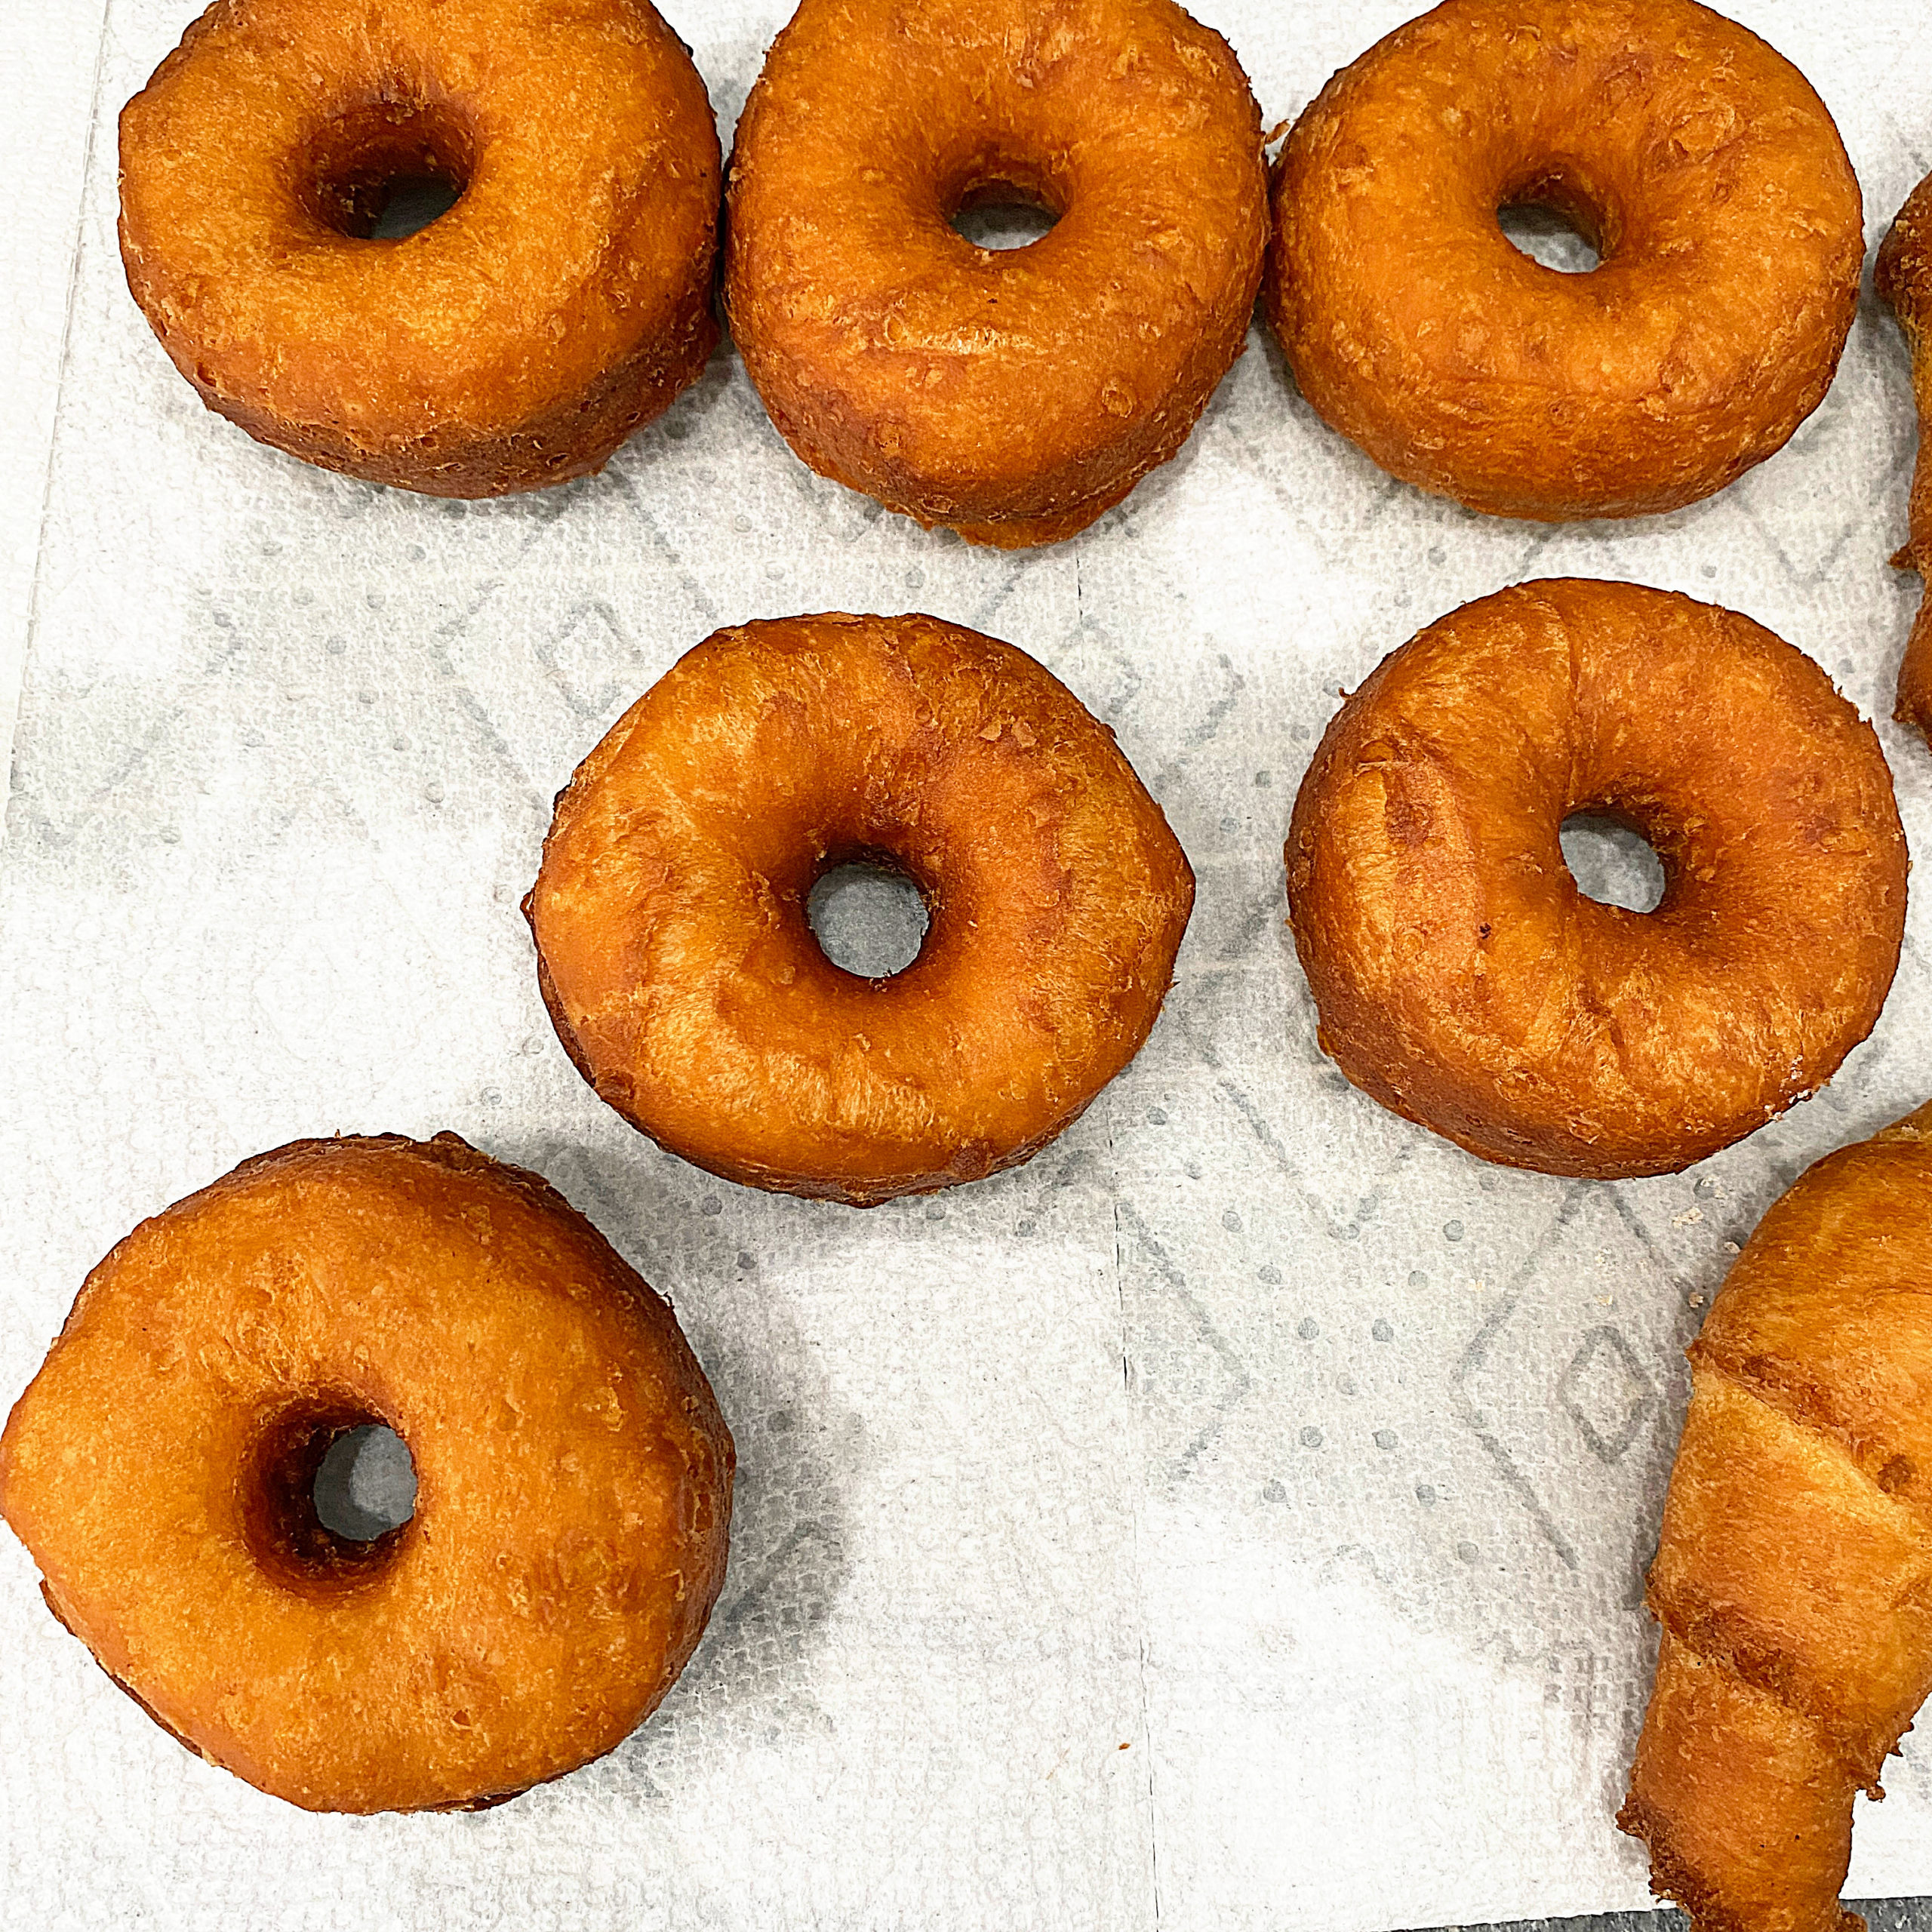 How to Transform Store Bought Dough into Donuts